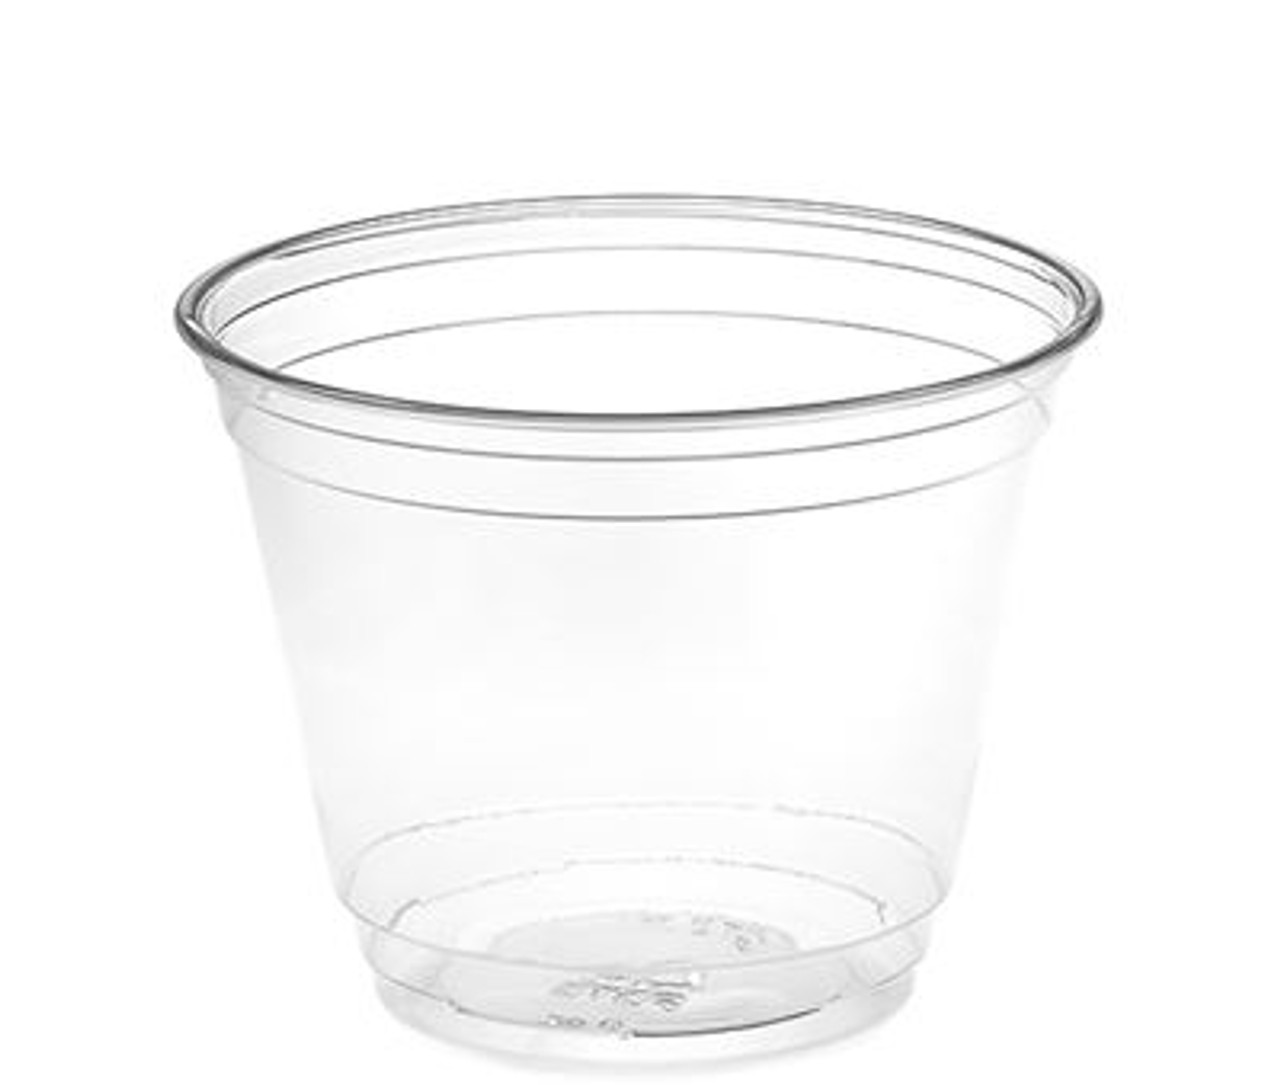 Solo Plastic Cups Squared 18 Ounce, Plates, Bowls & Cups